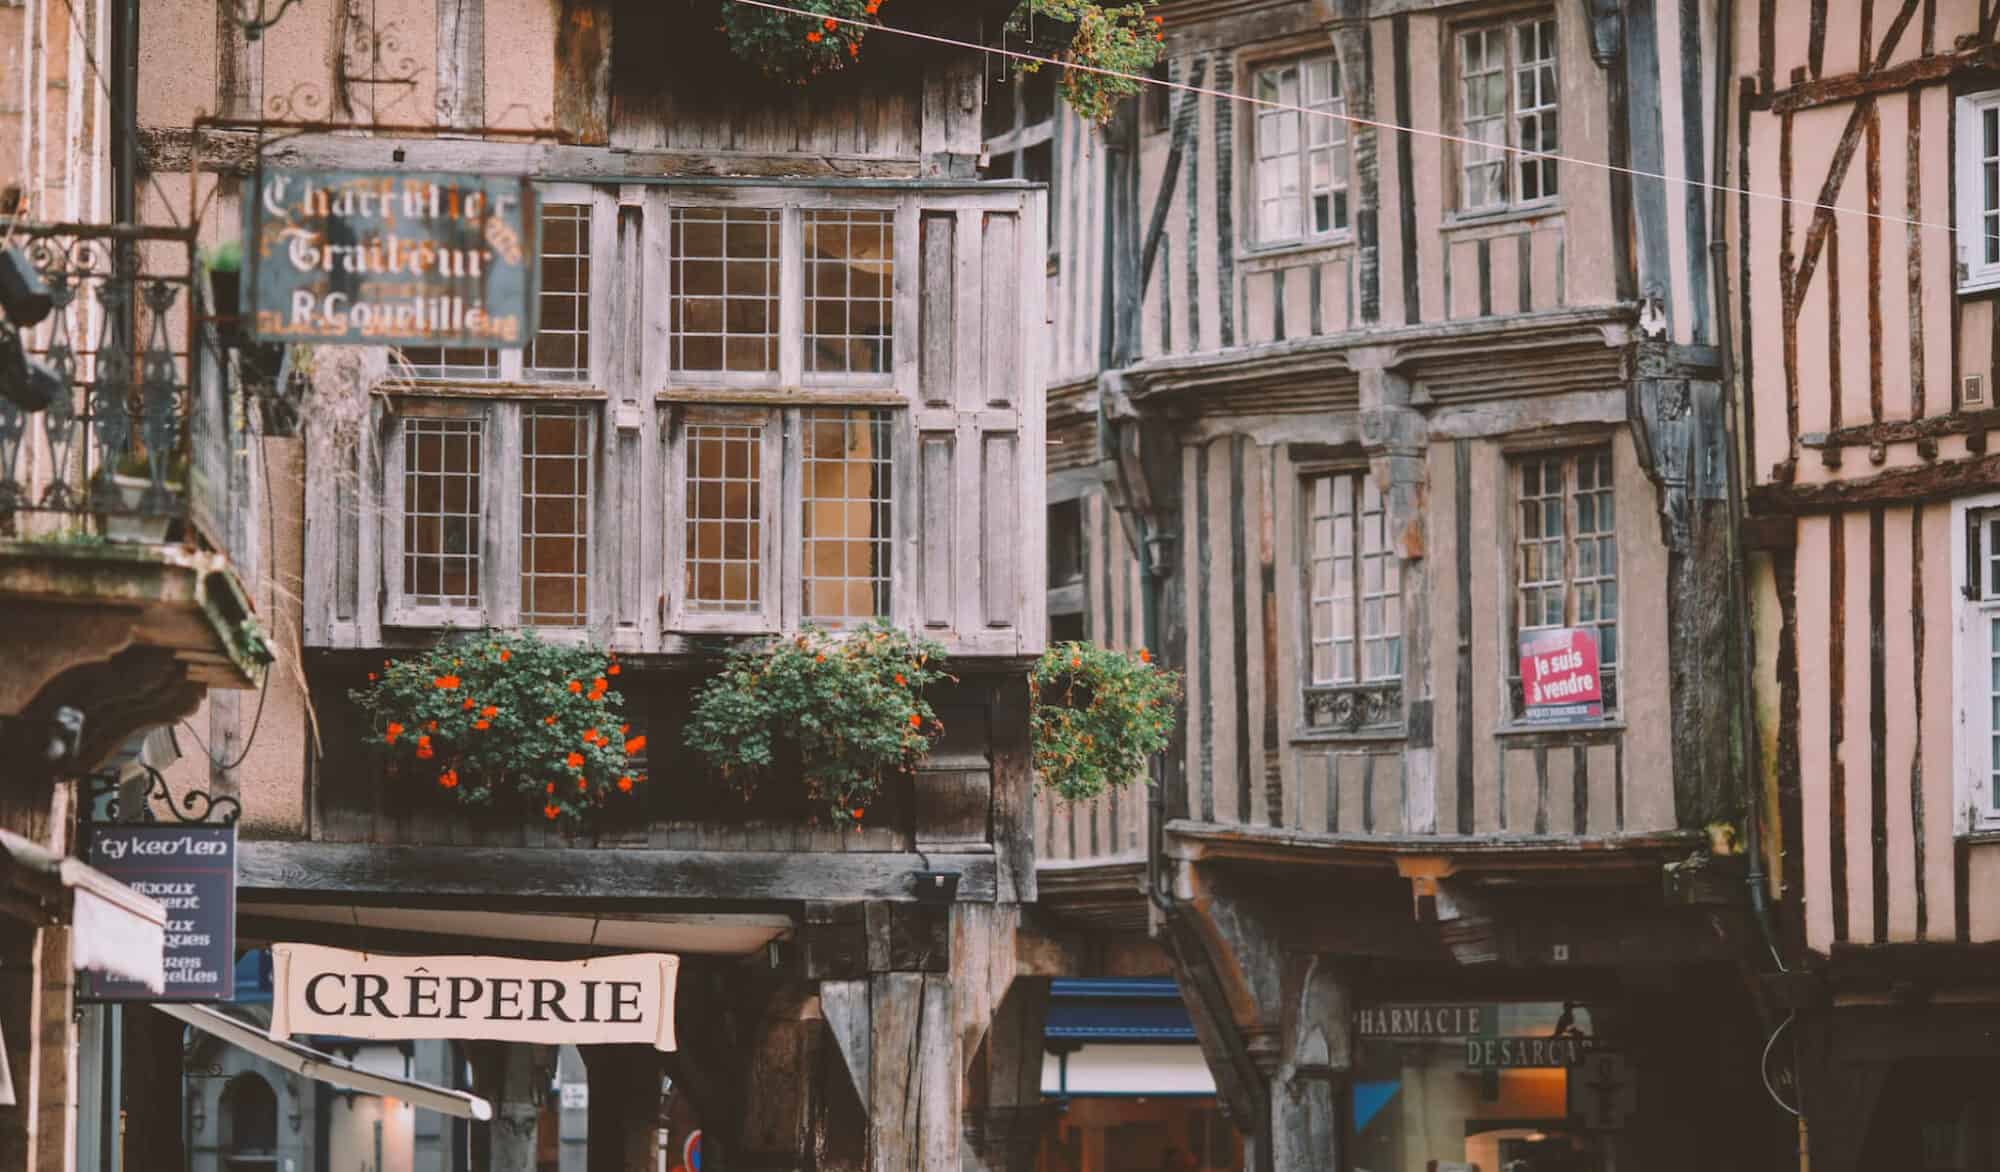 A medieval city full of wooden houses, with shrubs of flowers, and a creperie sign.